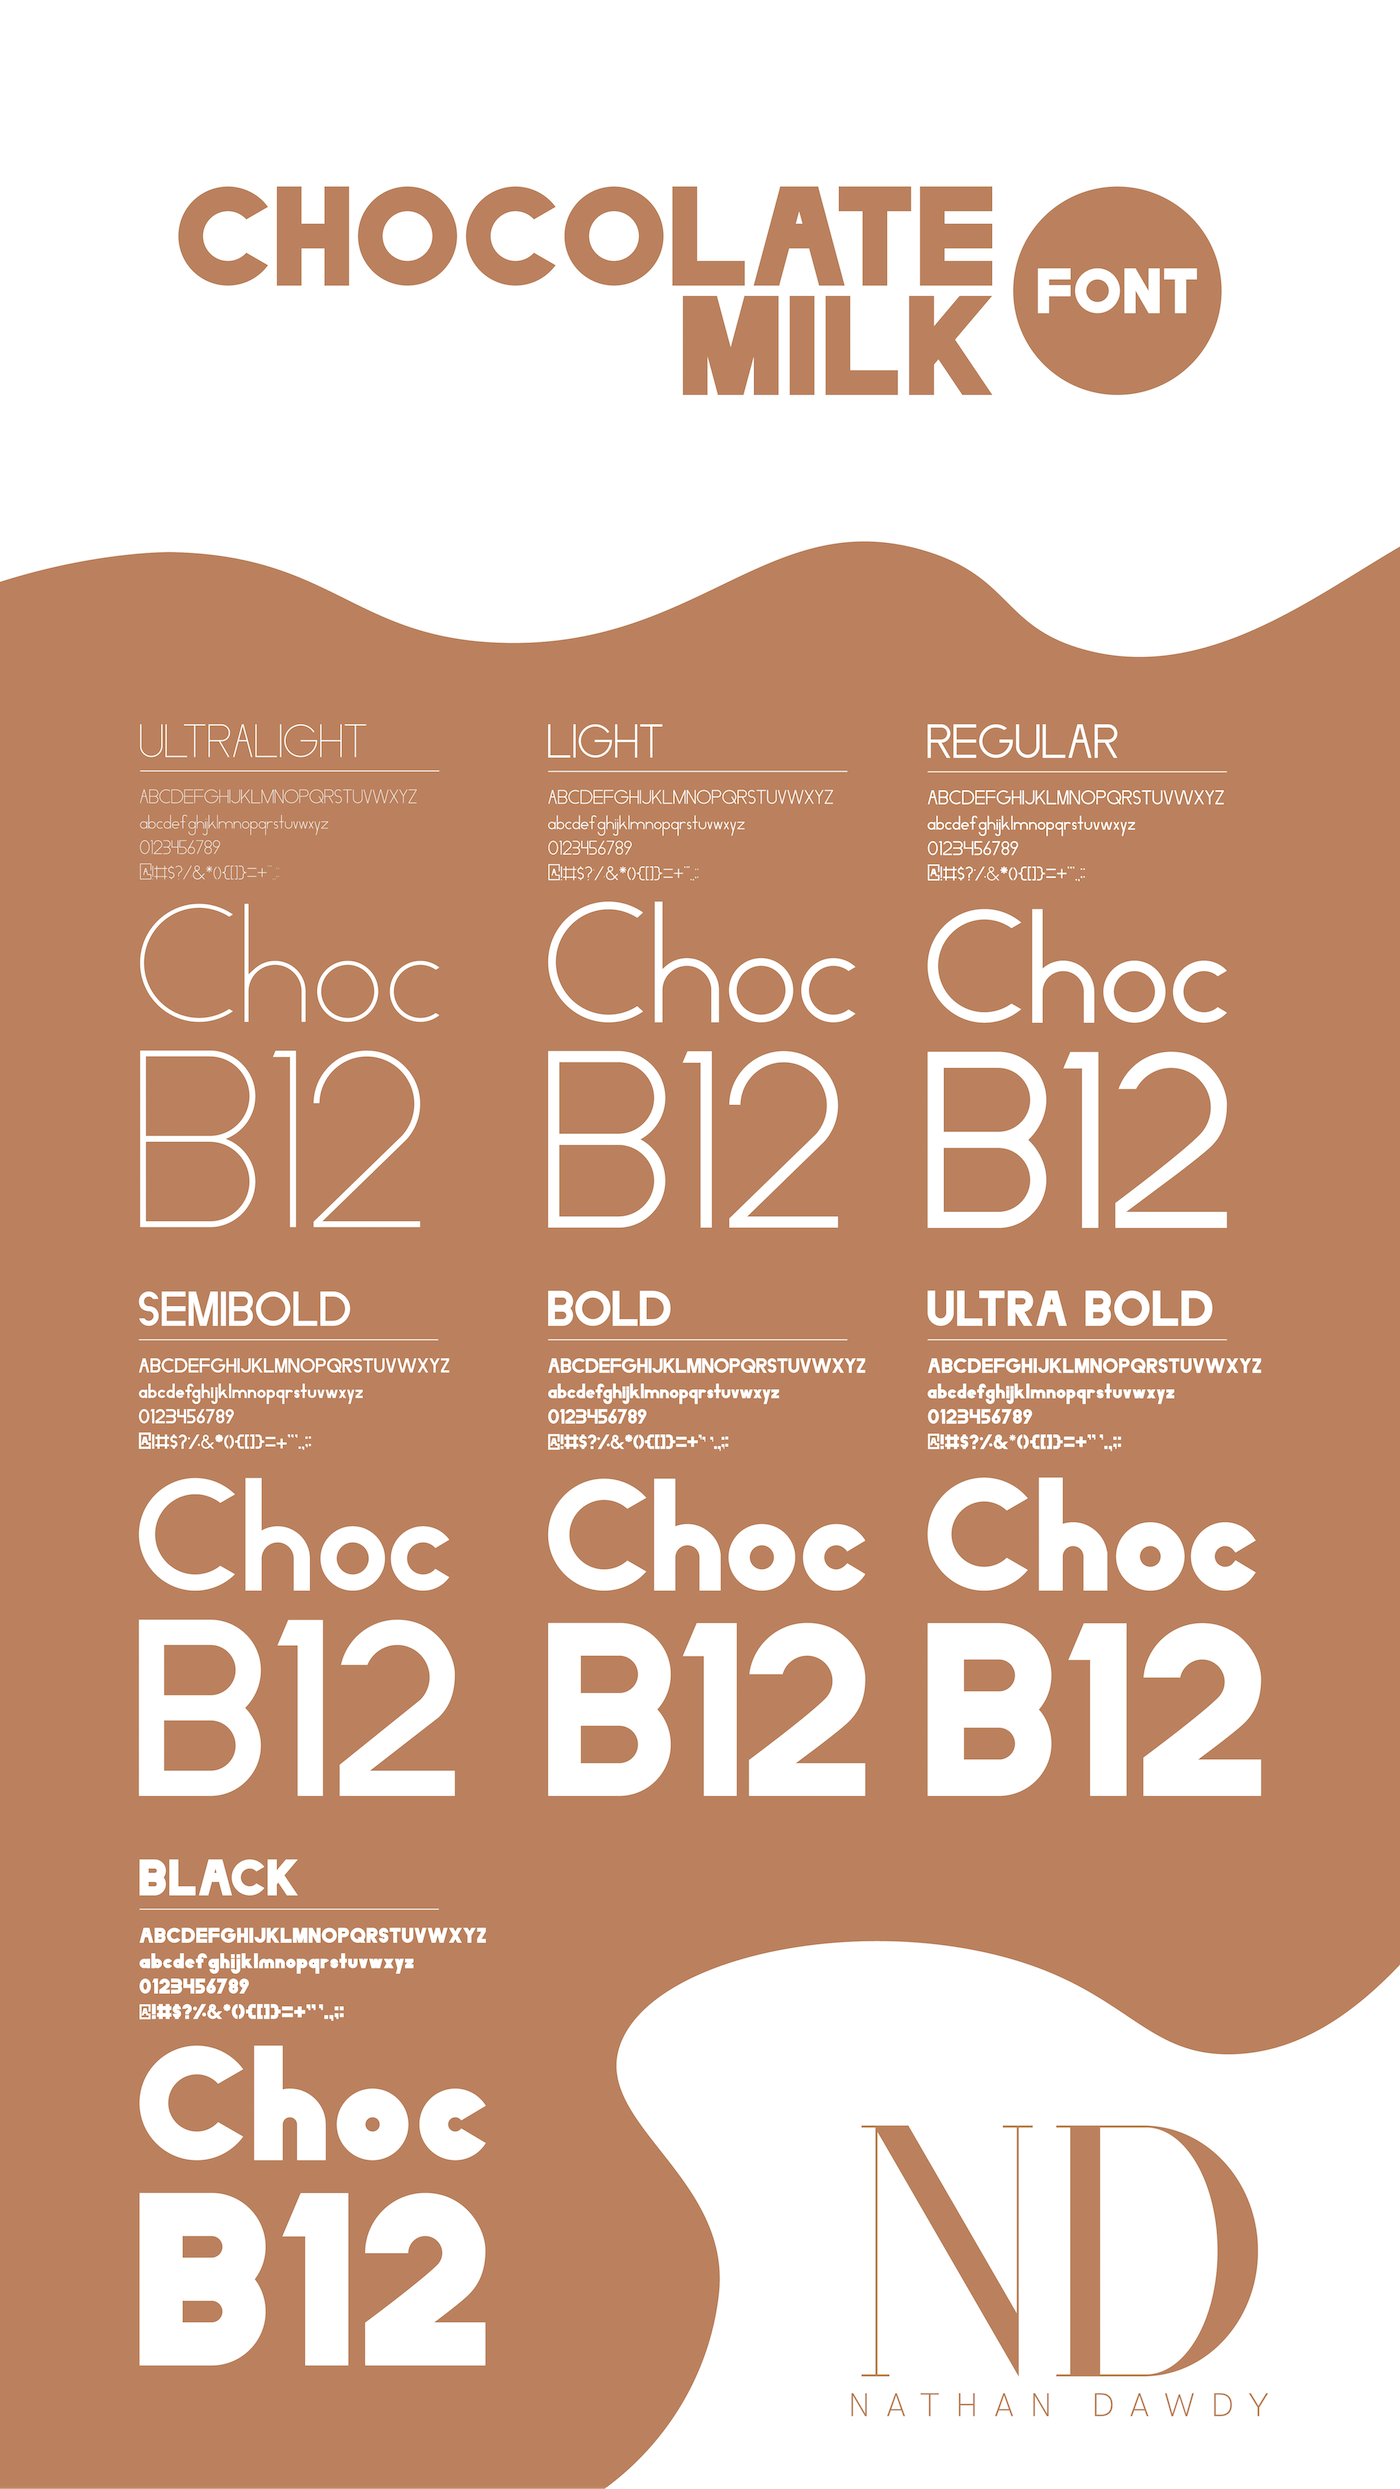 font fonts type Typeface typefaces milk chocolate milk Nathan Dawdy